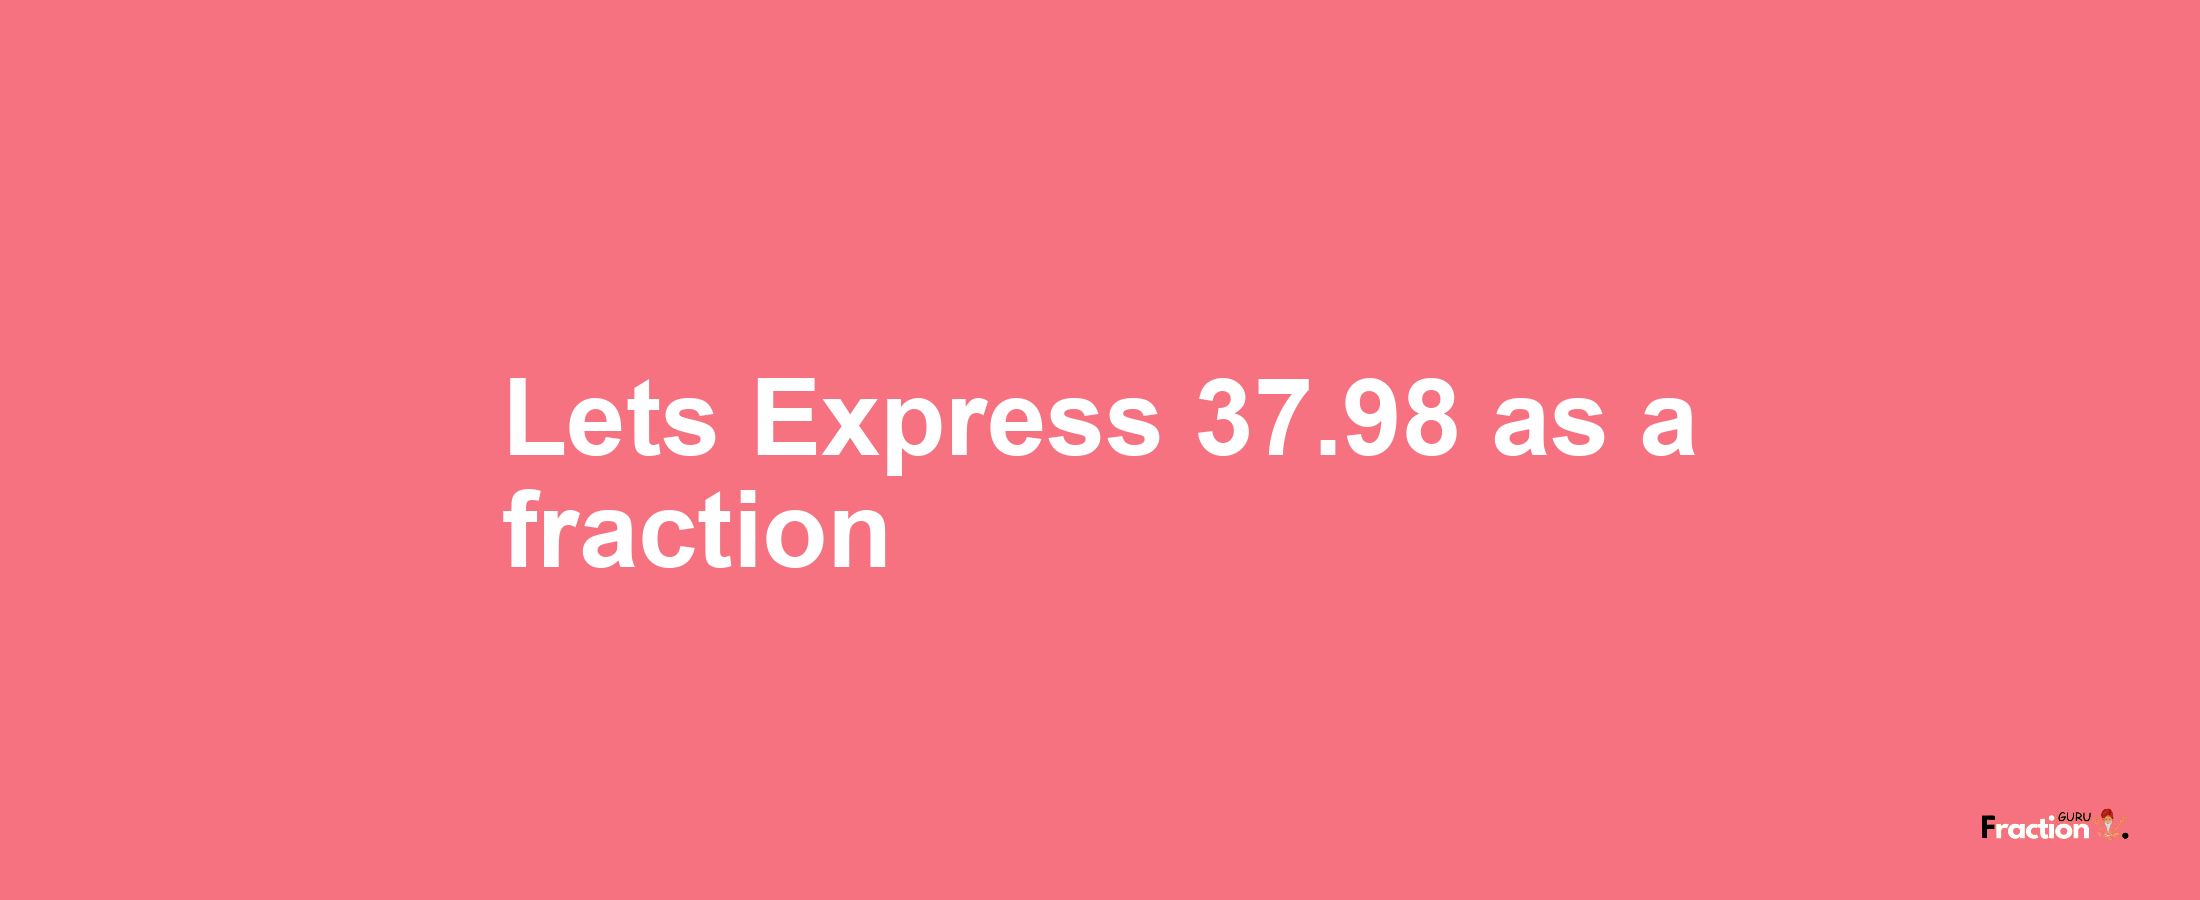 Lets Express 37.98 as afraction